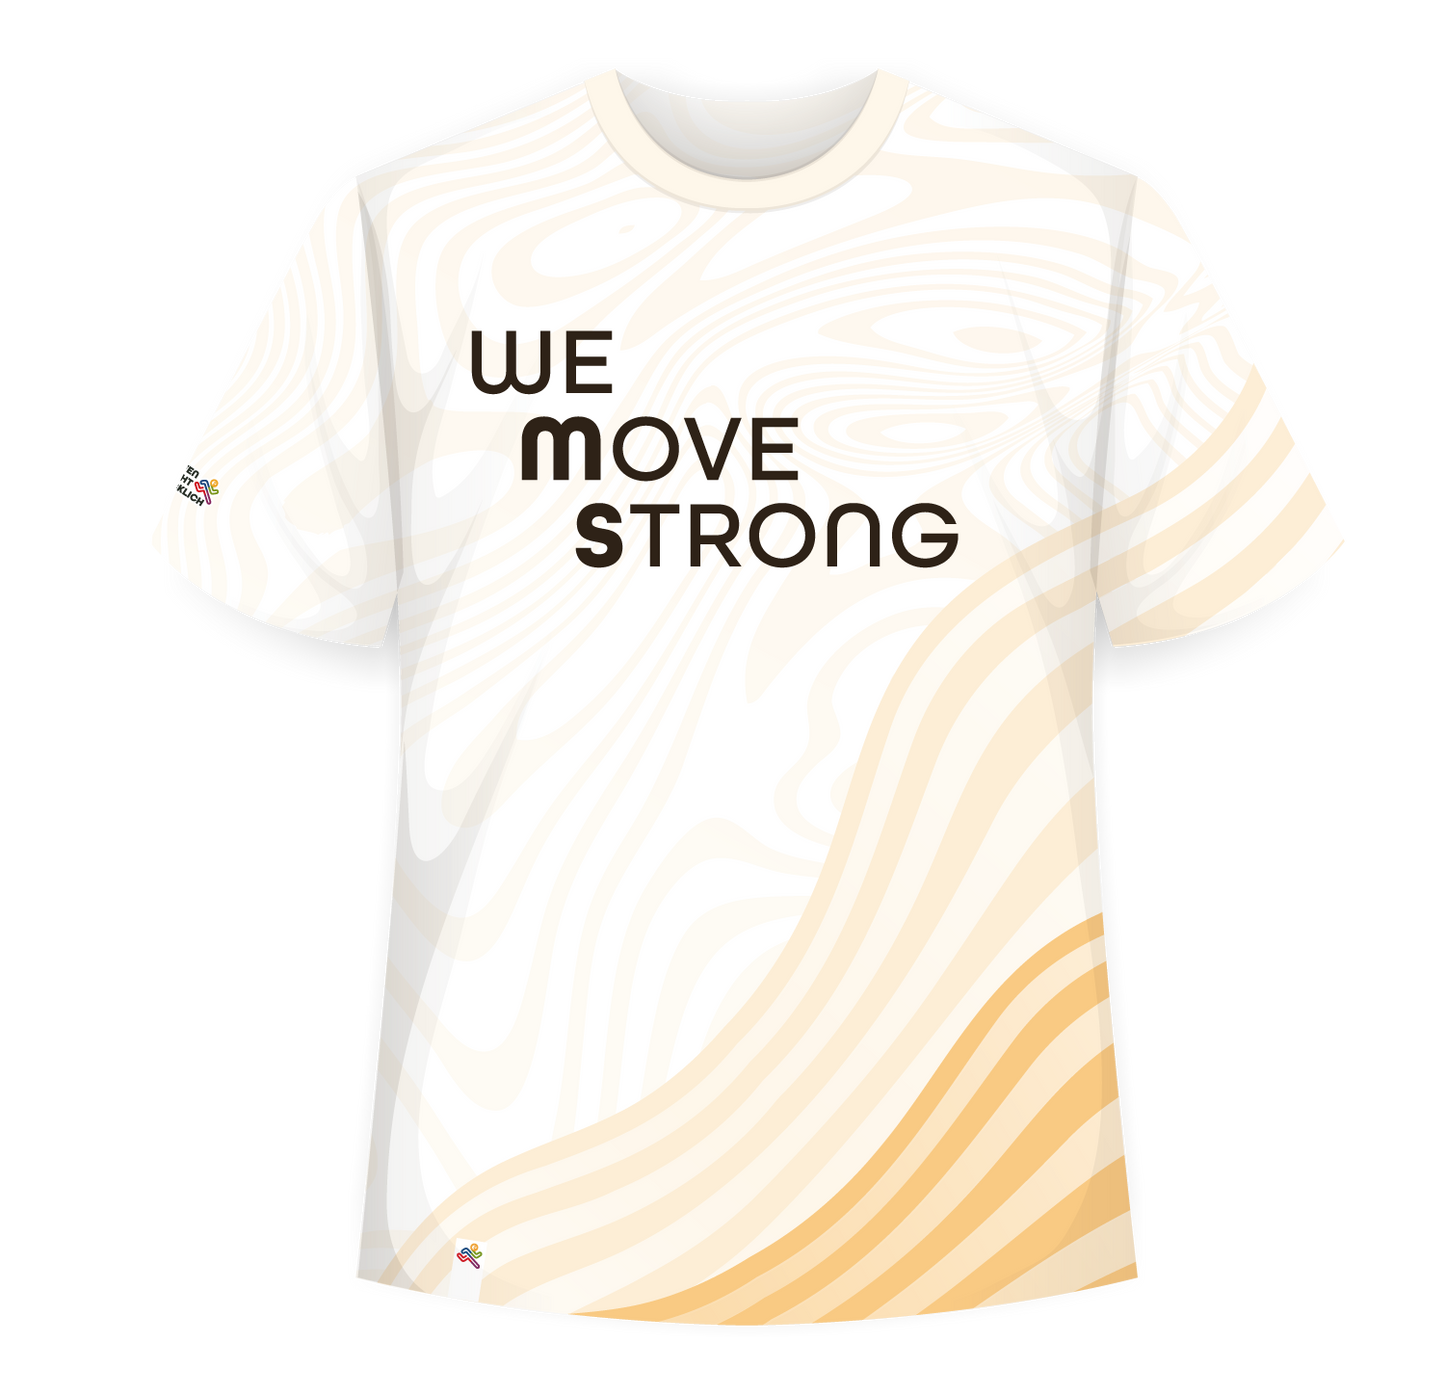 Shirt "Move For MS" (2023)